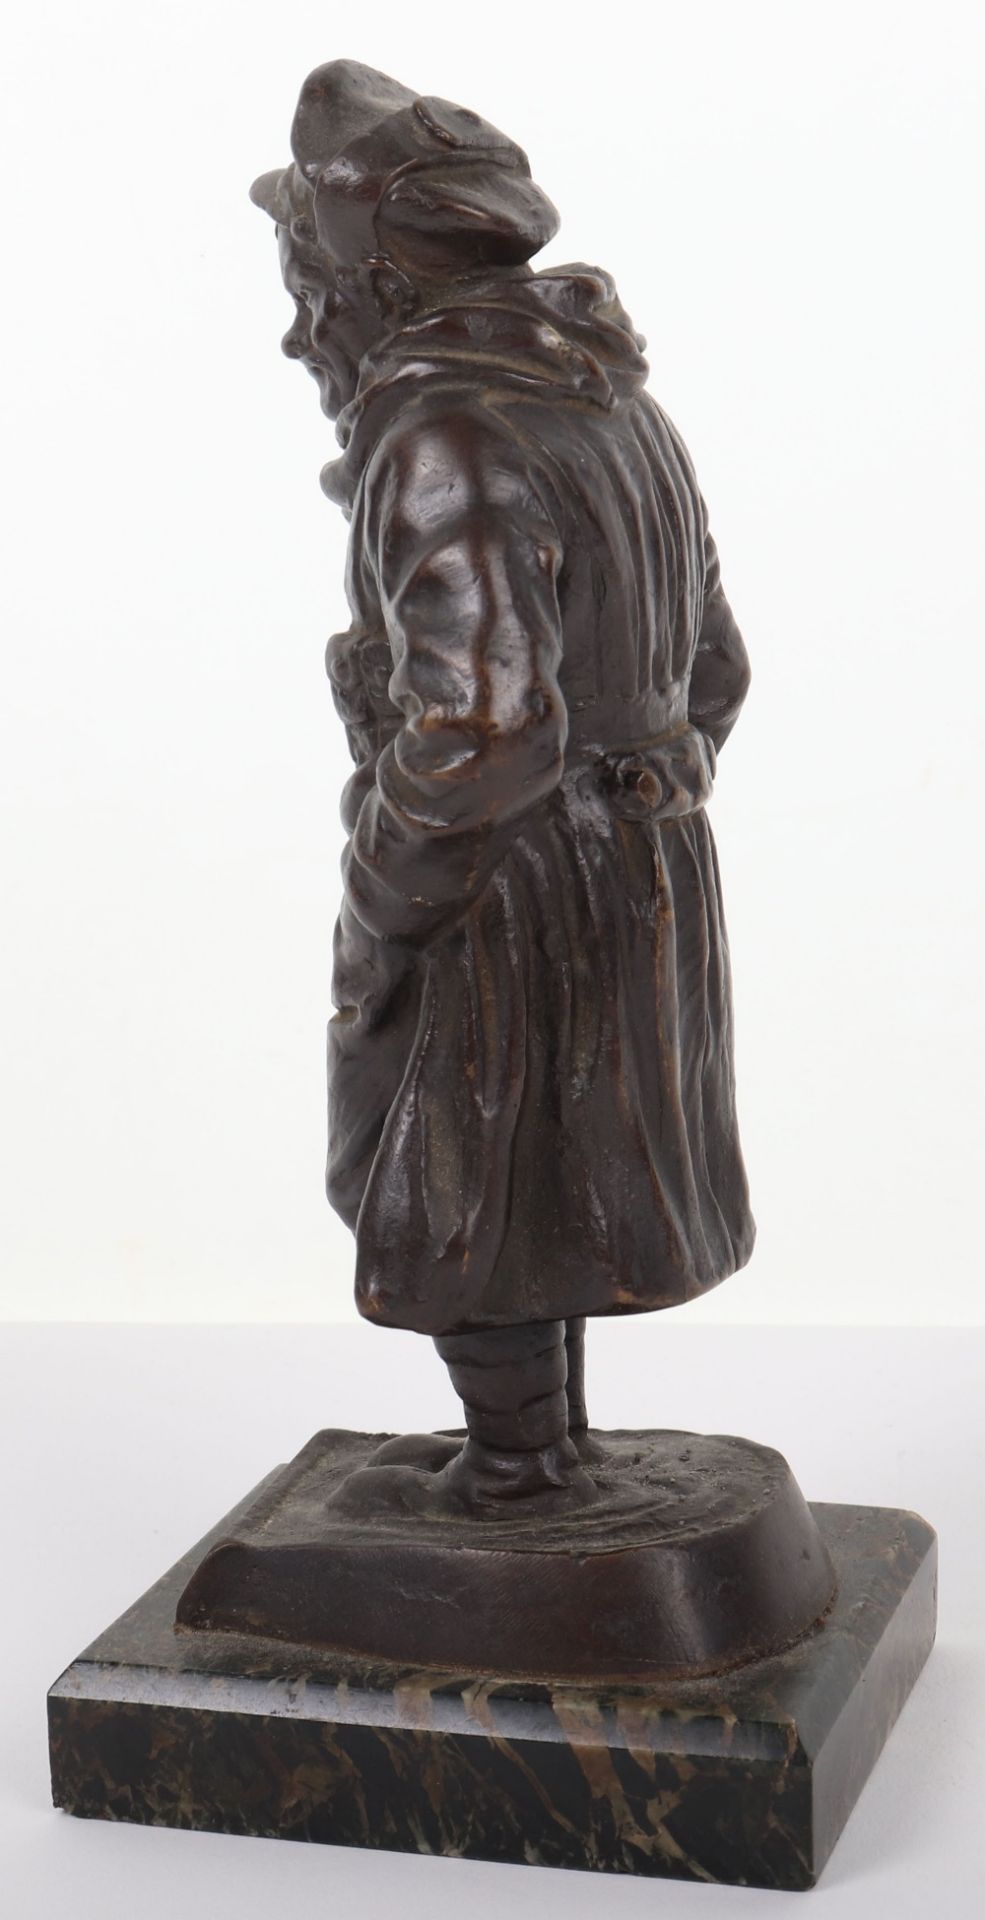 Bronze Figure of a WW1 British Tommy in the Bruce Bairnsfather “Old Bill” Style - Image 5 of 8